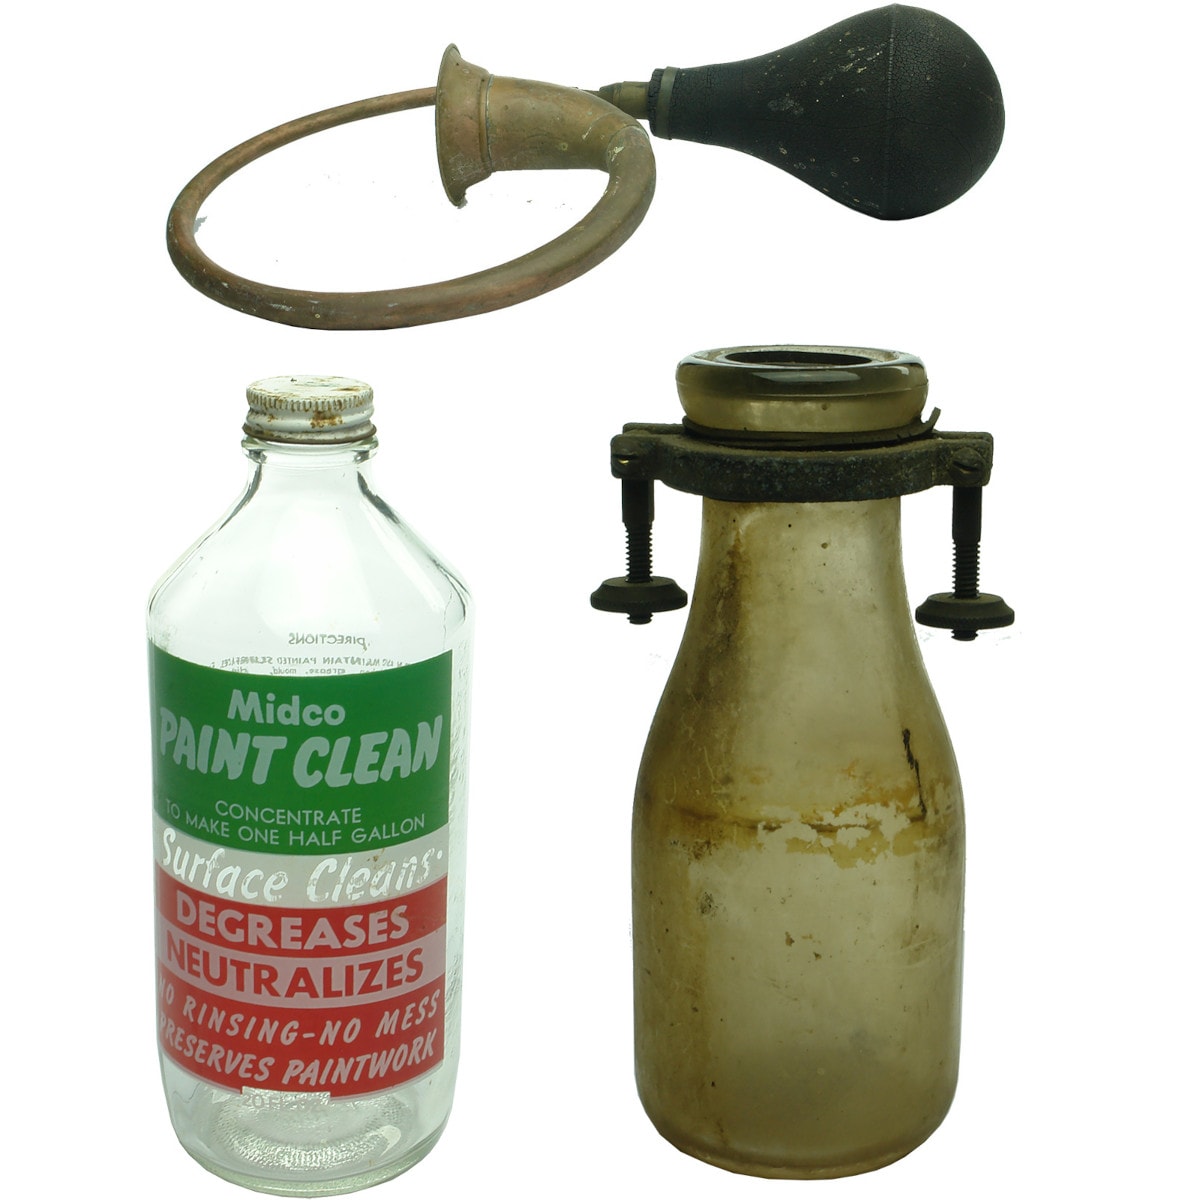 3 Garagenalia Items: Car Horn; Midco Paint Clean Ceramic Label bottle; Milk shaped bottle with heavy metal collar for oil or similar.